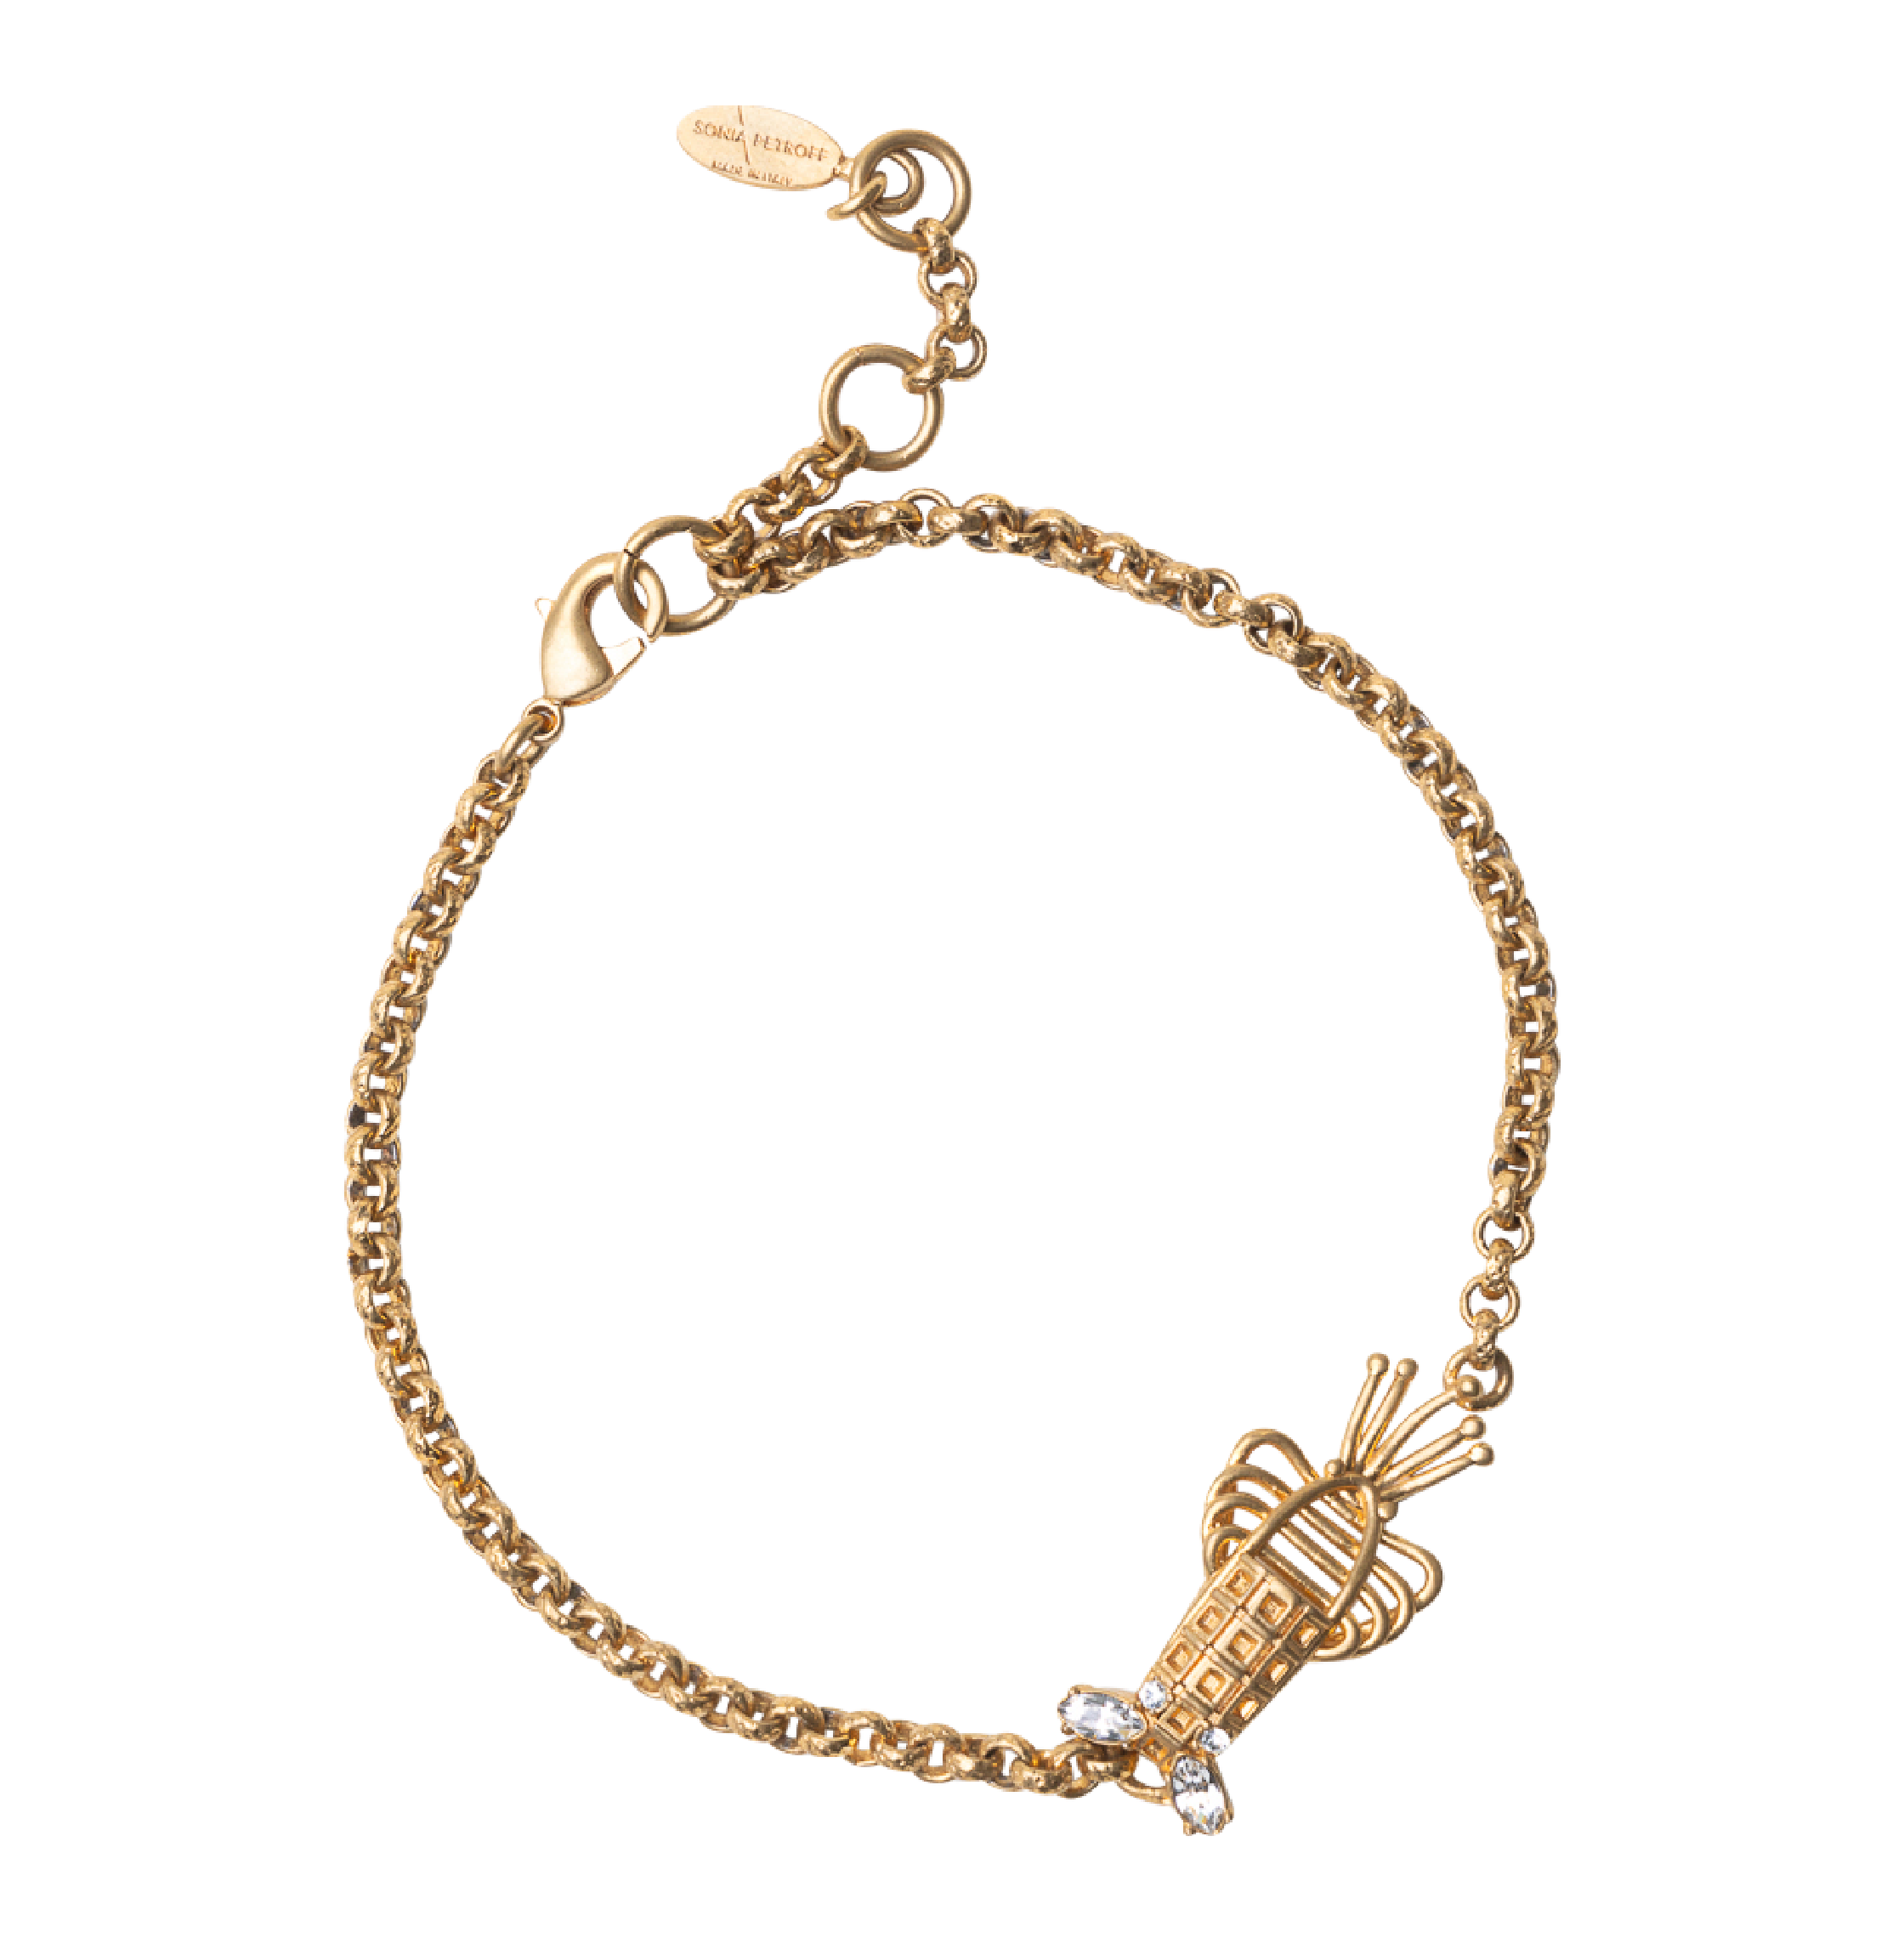 Lobster Anklet Chain Sonia Petroff gb 